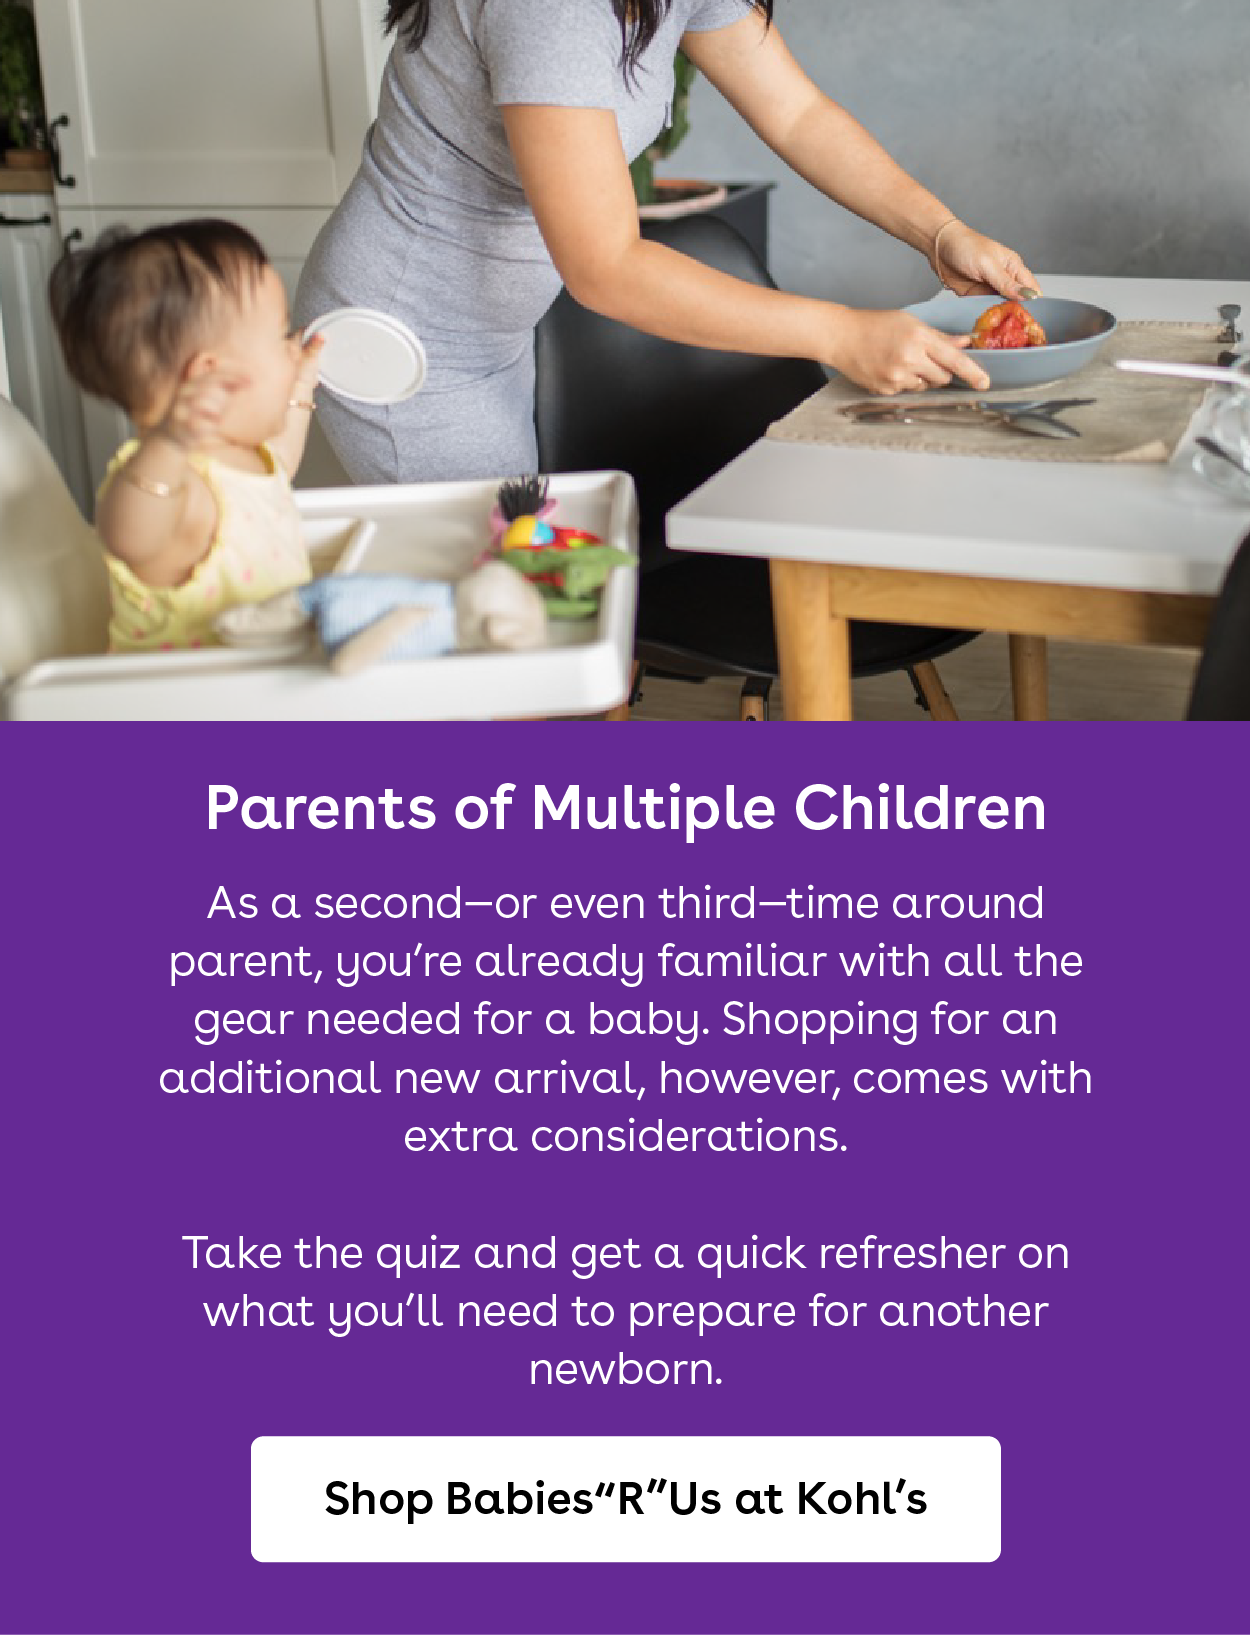 parents of multiple children. as a second or even third time around parent you are already familiar with all the gear needed for baby. shopping for an additional new arrival however comes with extra considerations. take the quiz and get a quick refresher on what you will need to prepare for another newborn. Shop babies r us at kohls